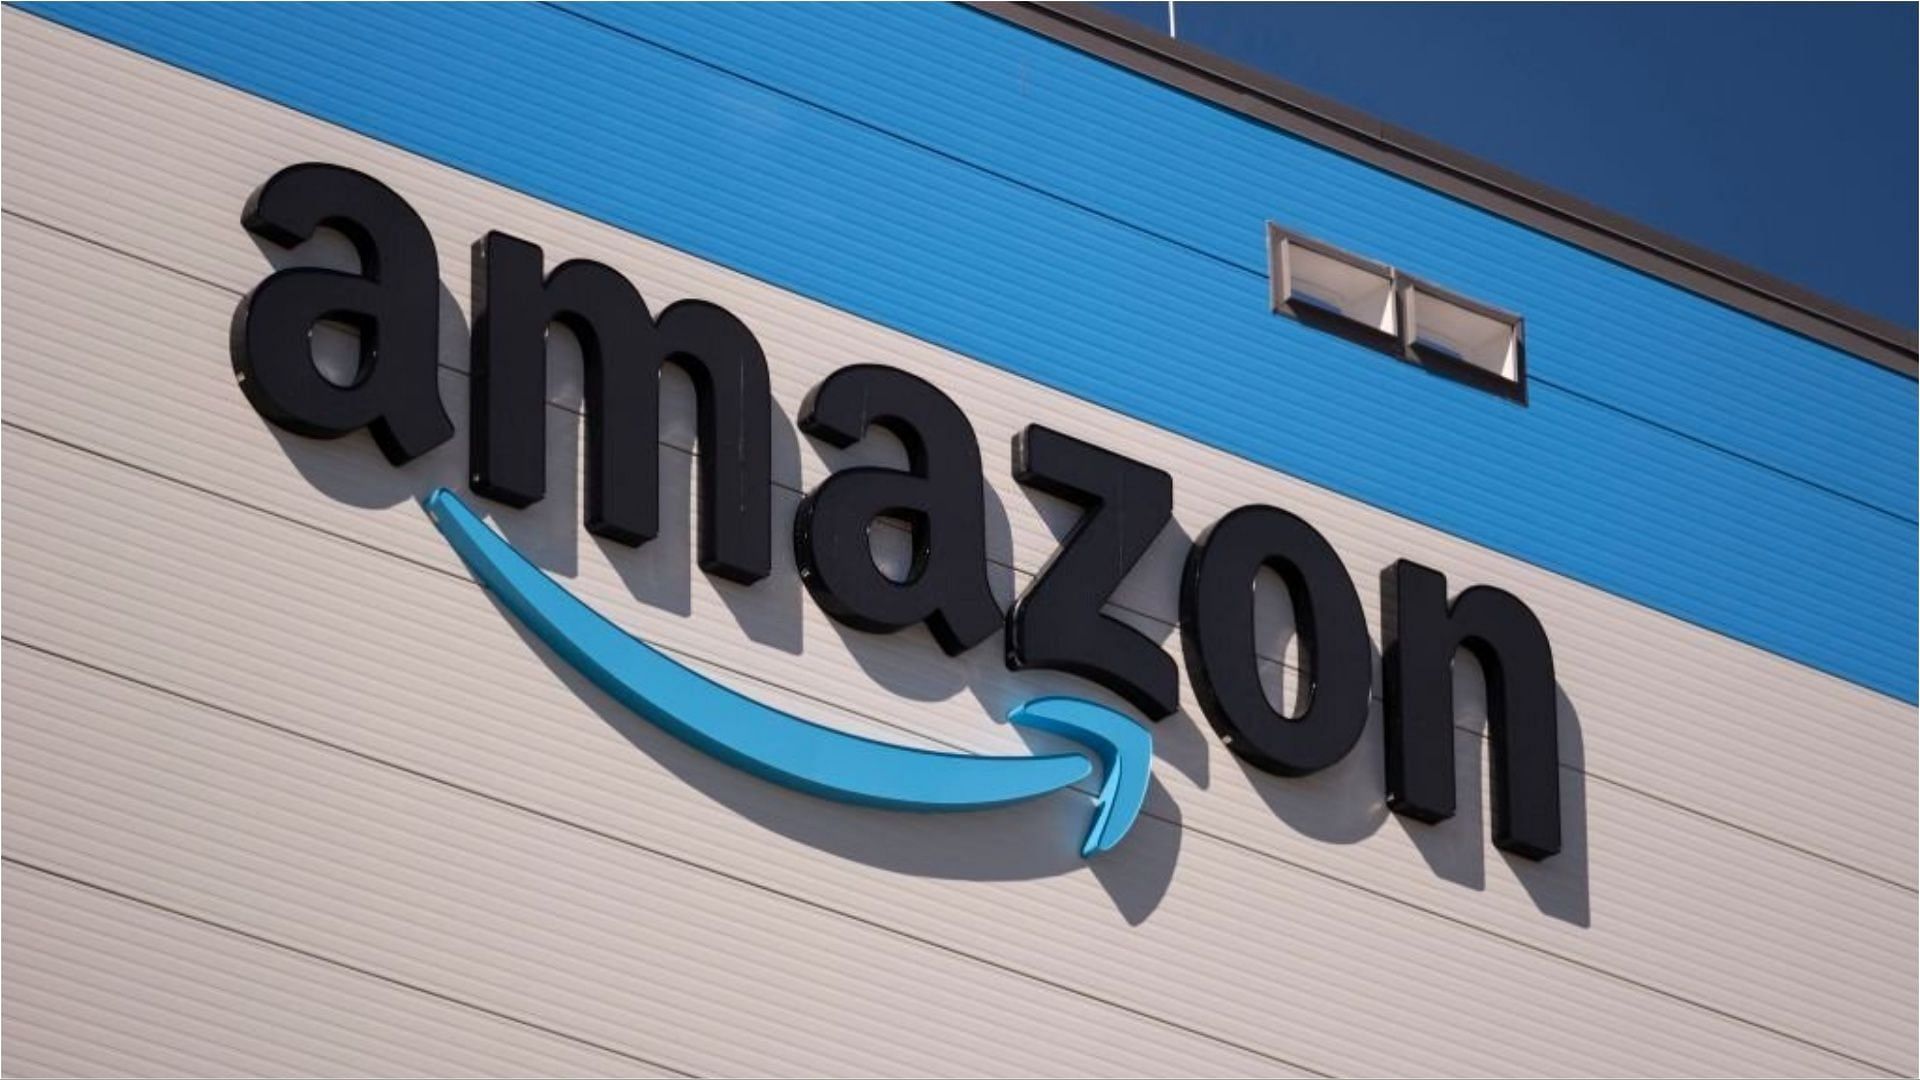 An employee died at the Amazon fulfillment center (Image via Billy Schuerman/Getty Images)